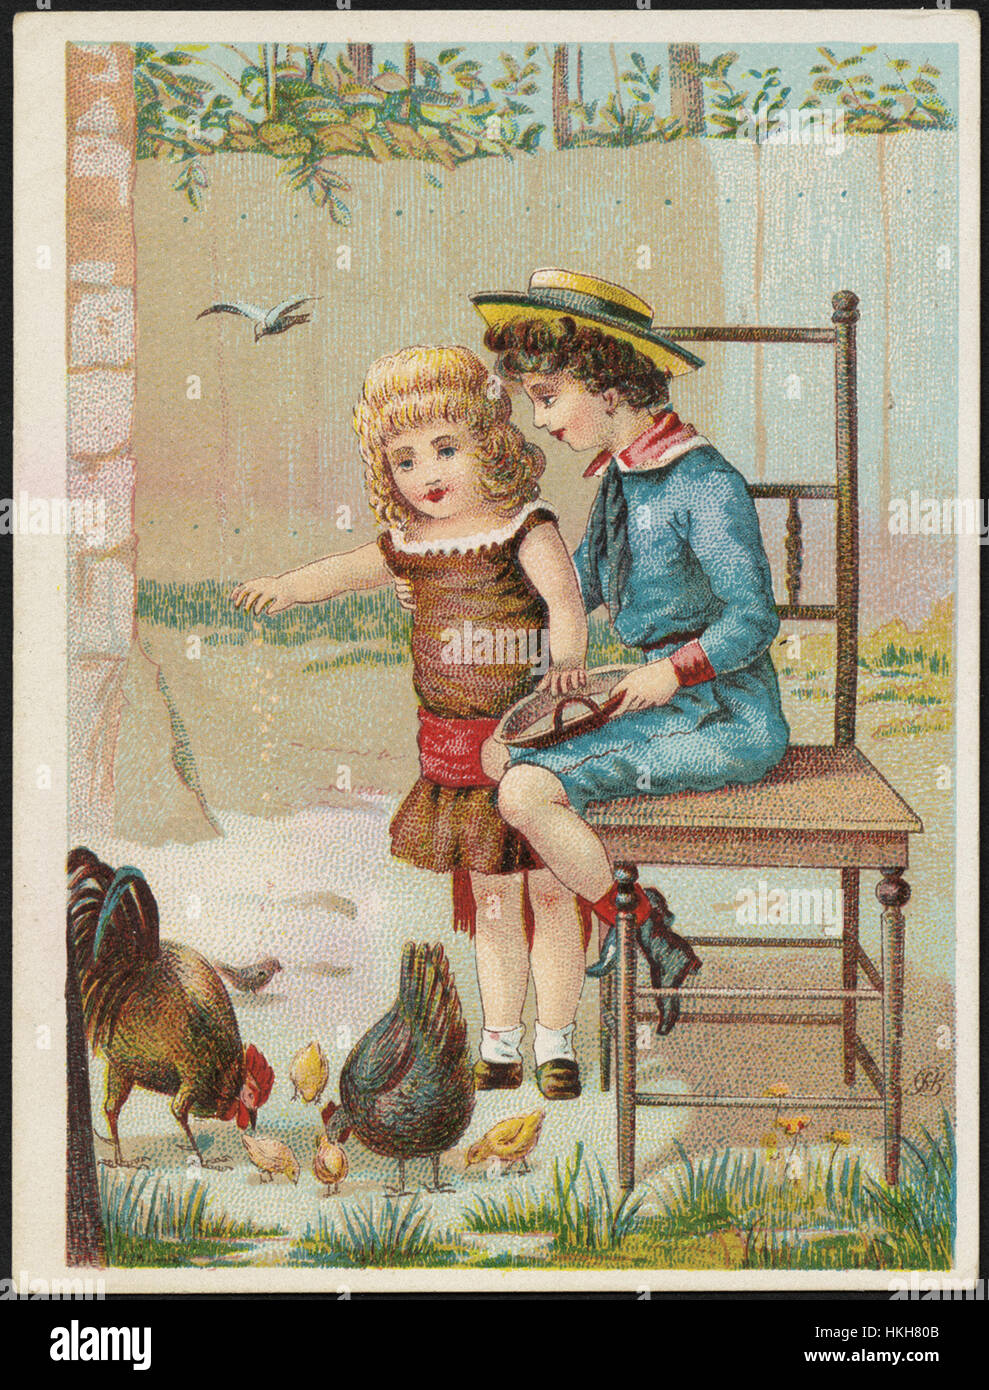 Boy sitting on a chair while a girl stands feeding chickens. Stock Photo